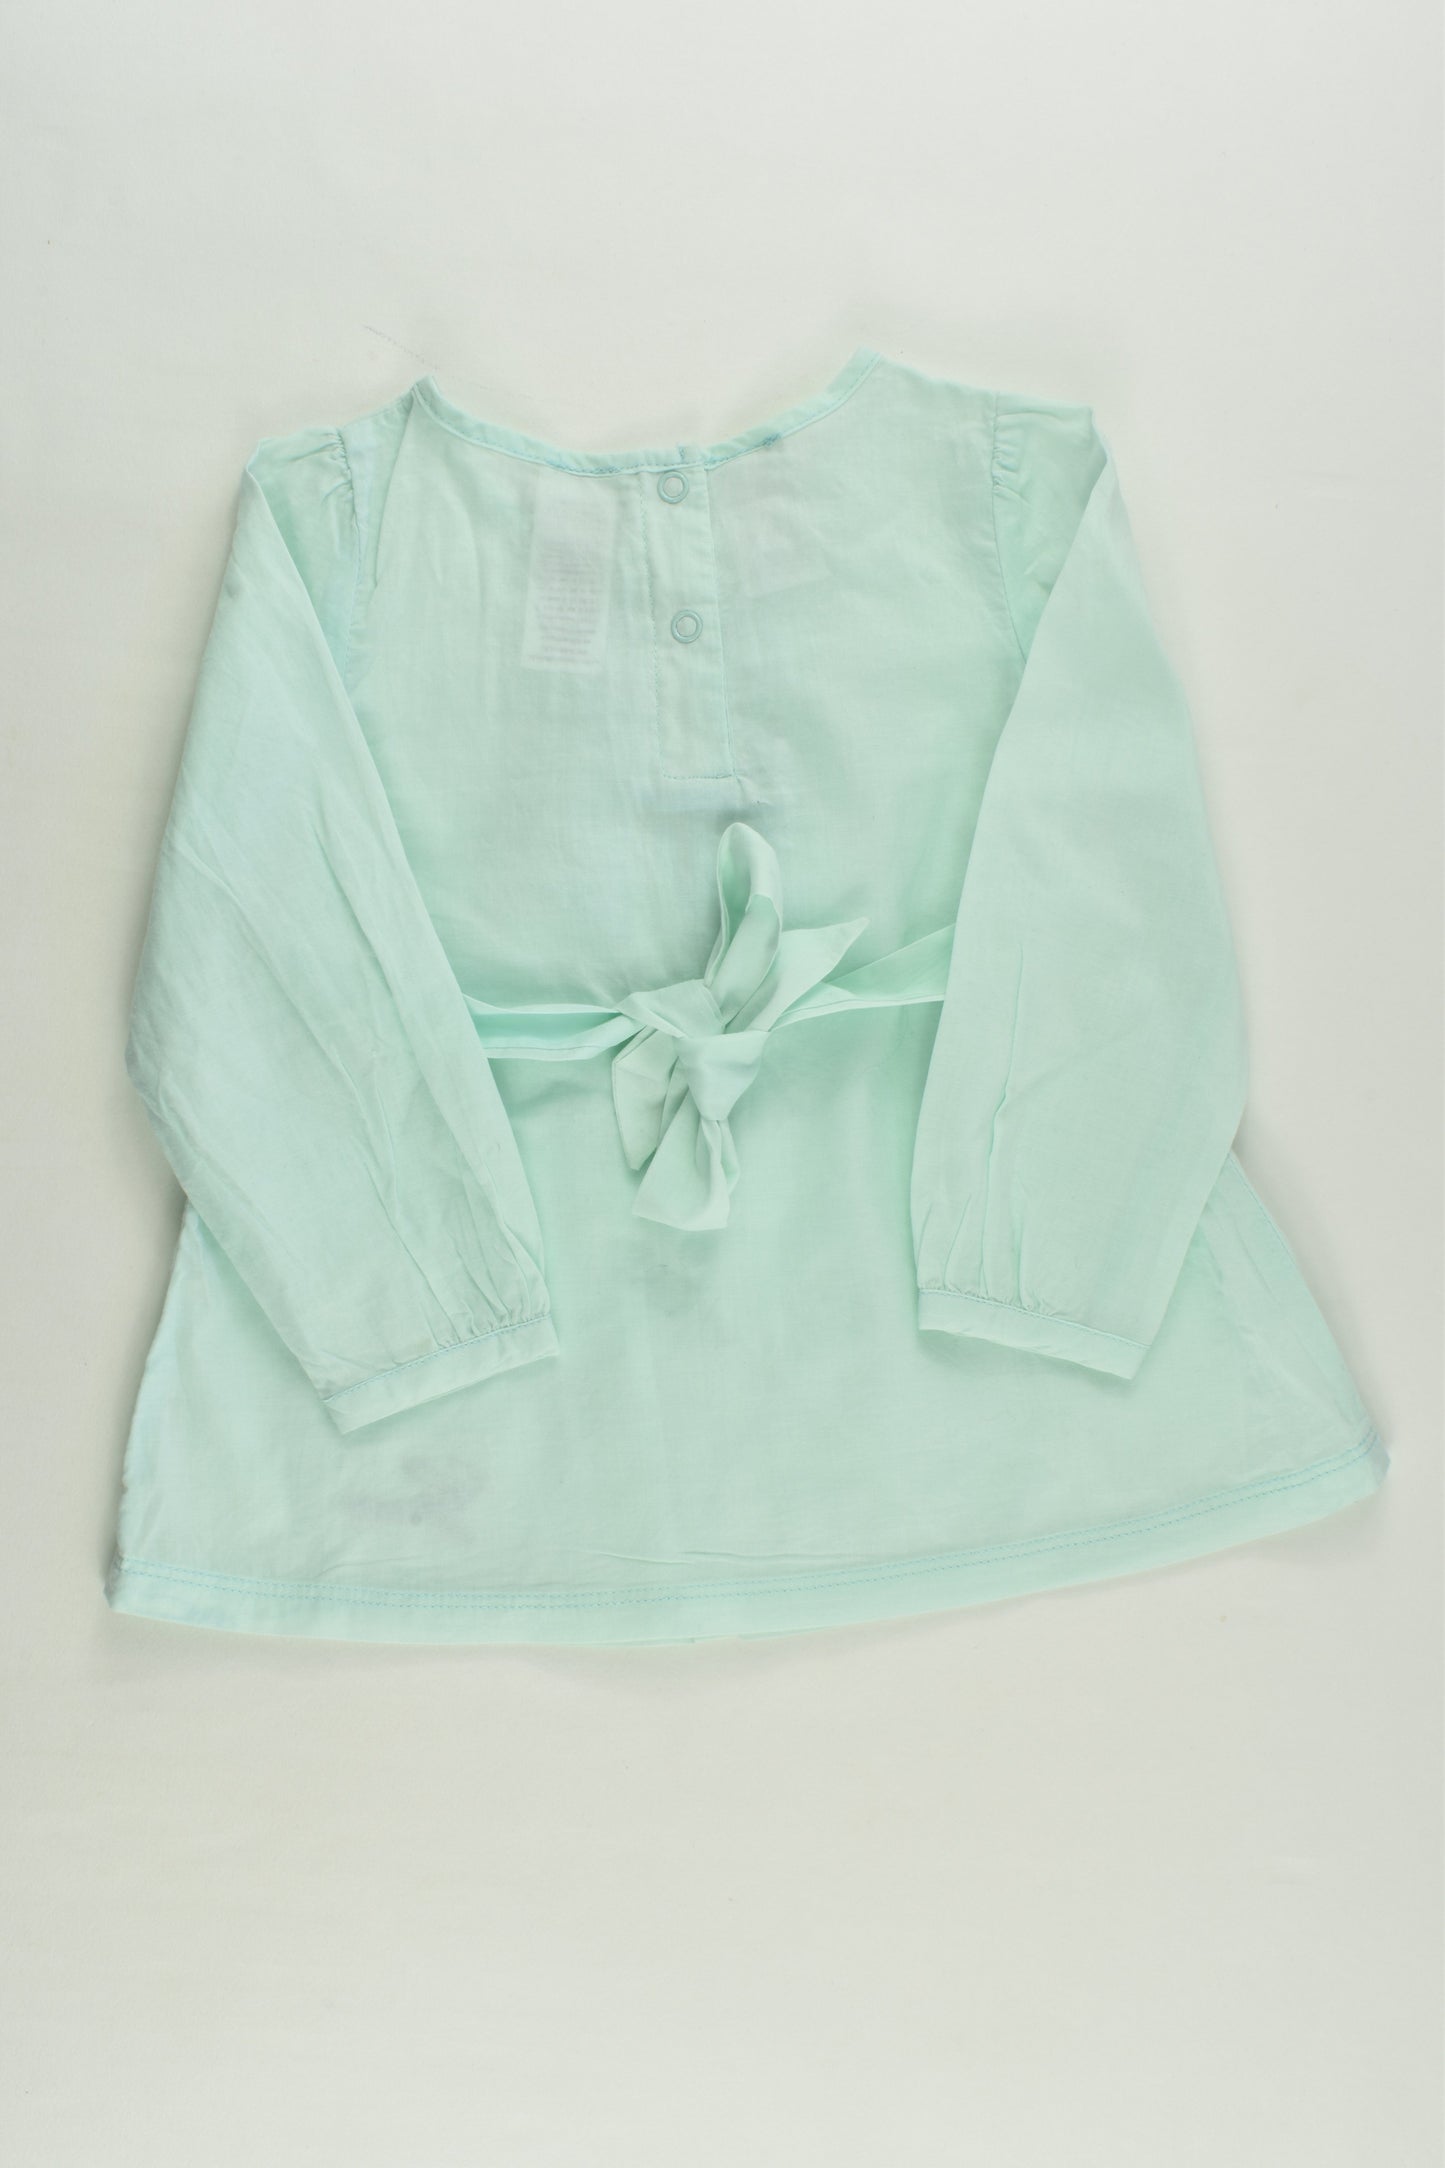 Guess Size 1 (18 months) Blouse